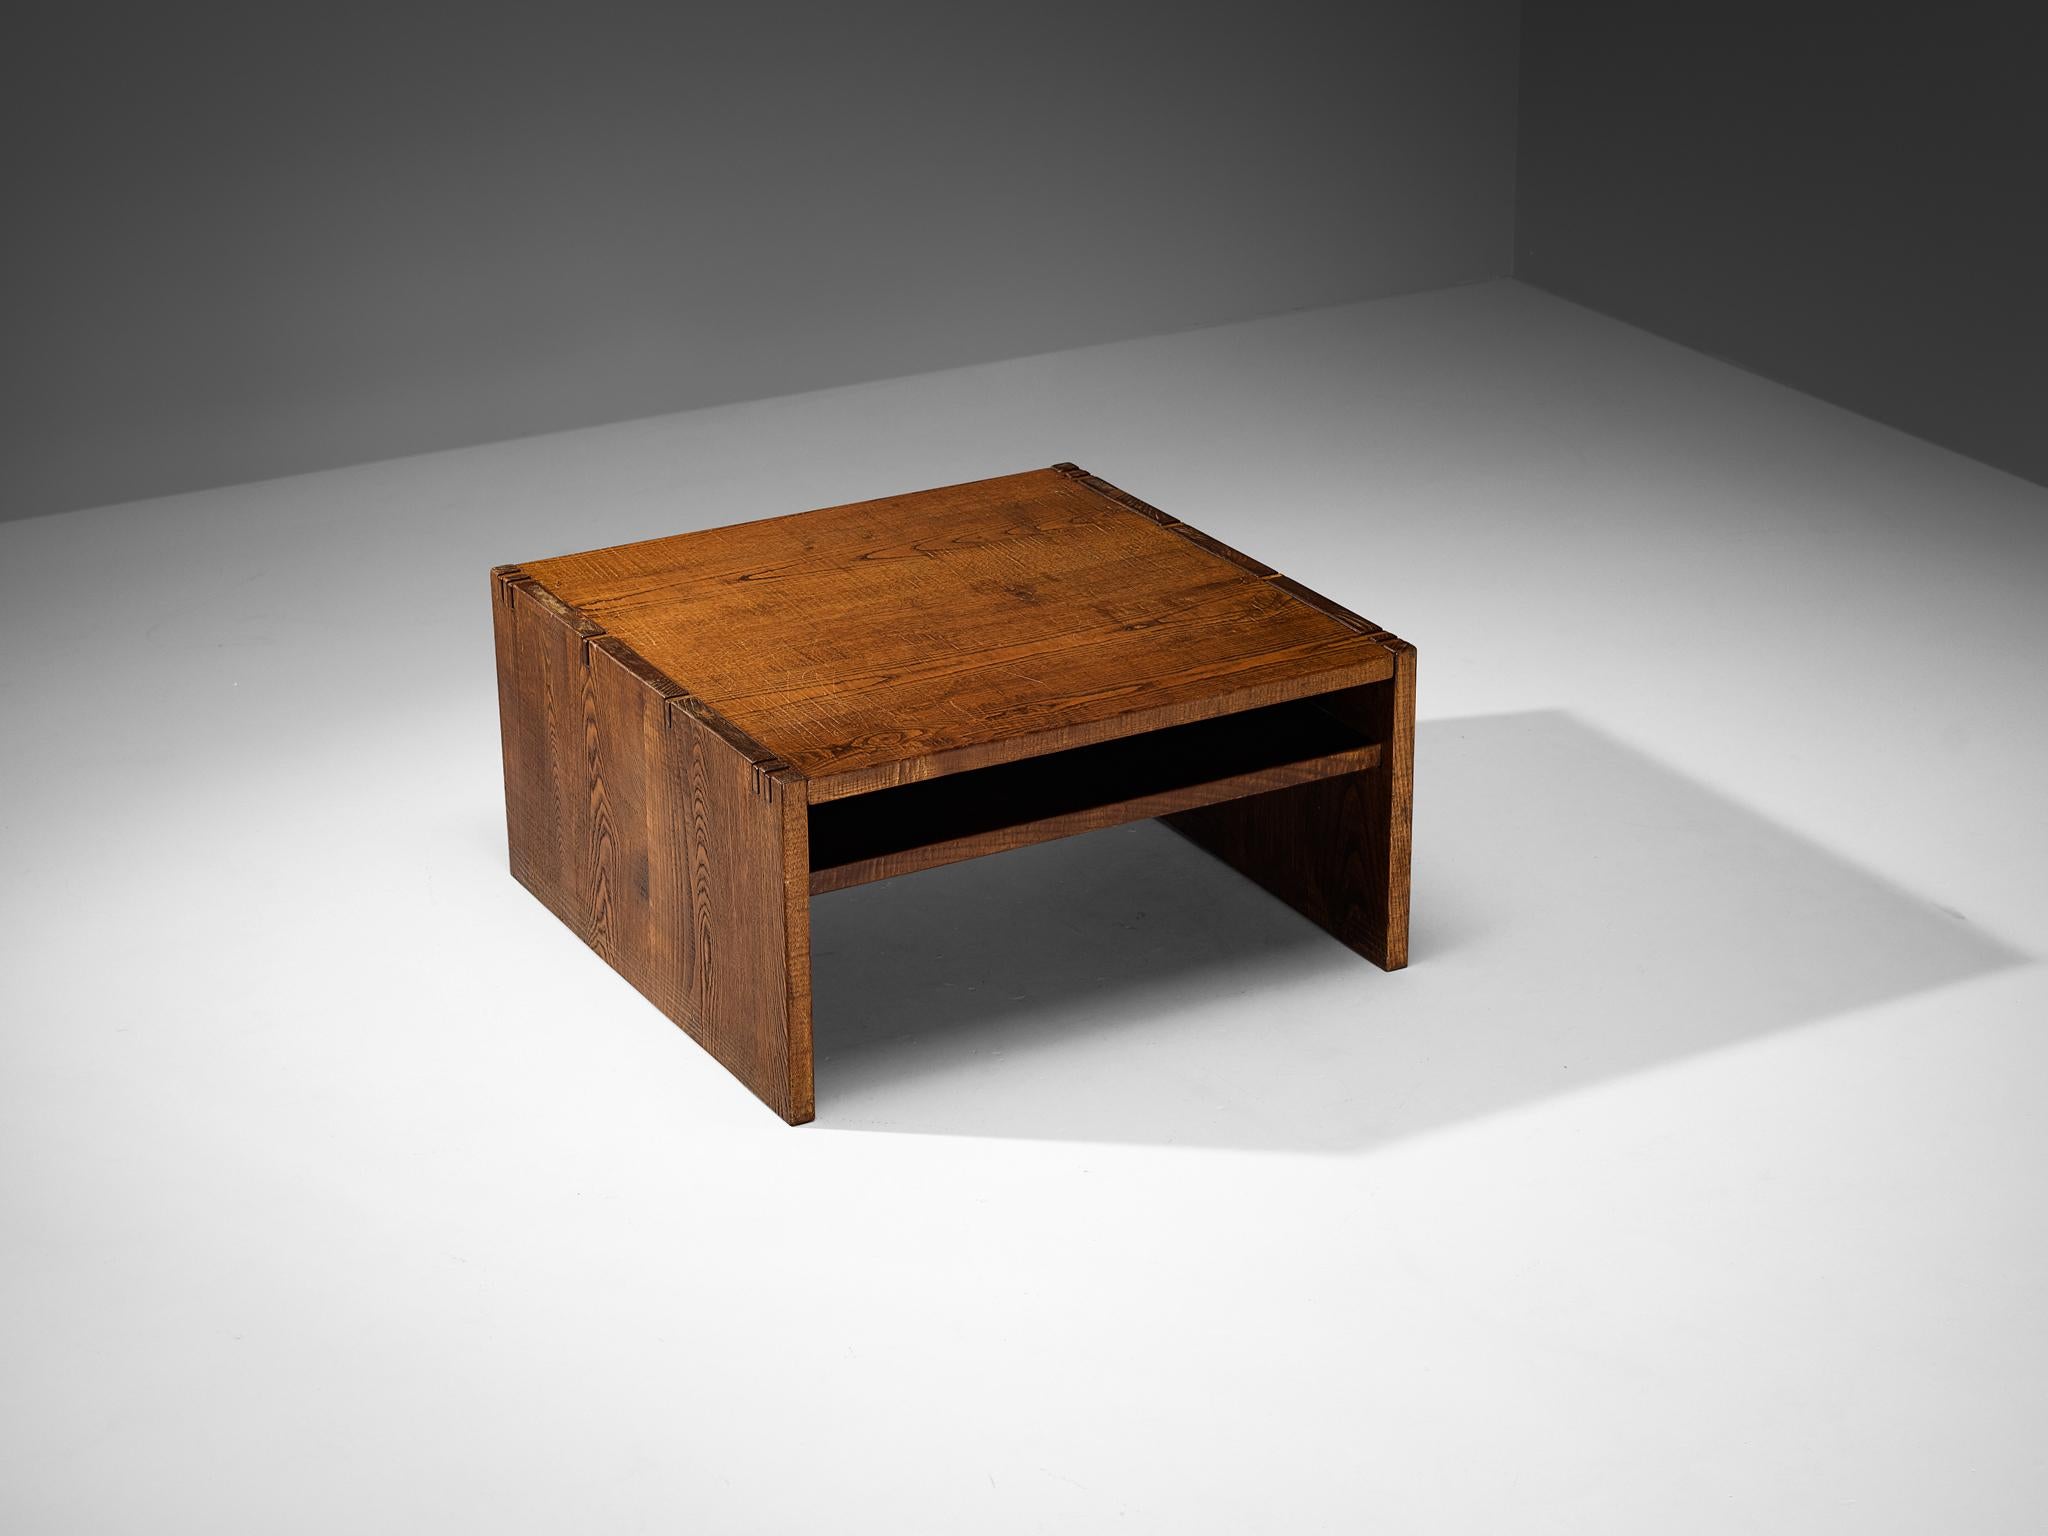 Giuseppe Rivadossi for Officina Rivadossi, coffee table, ash, Italy, 1980s

An exceptional coffee table by the Italian sculptor and designer Giuseppe Rivadossi, featuring a high level of craftsmanship in woodwork. This item embodies a striking